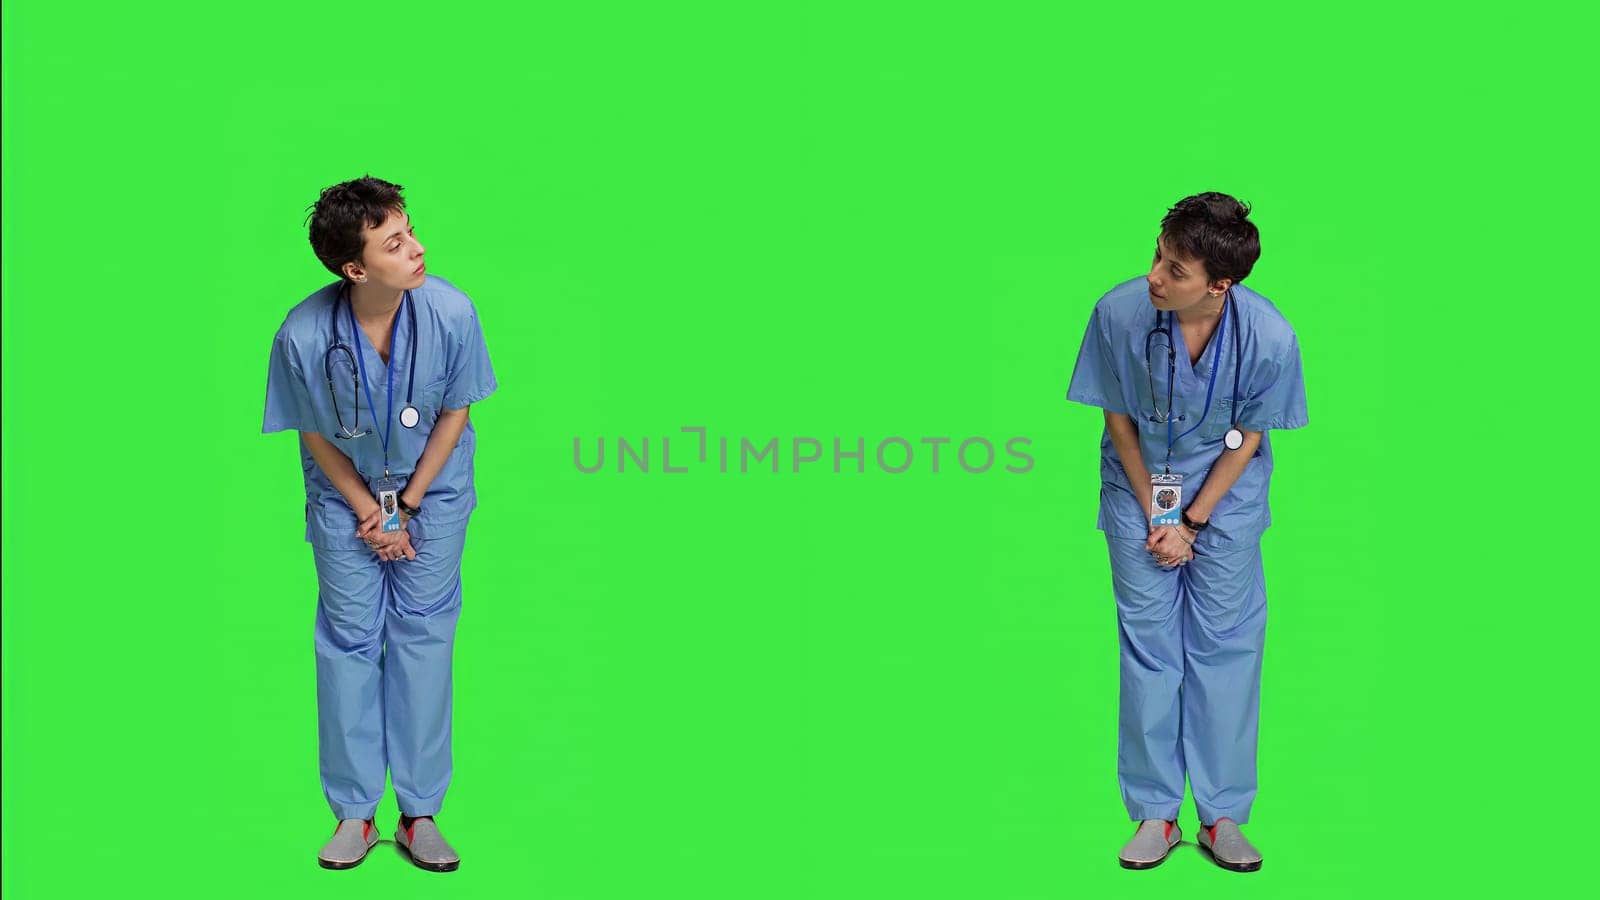 Medical assistant being impatient against greenscreen backdrop by DCStudio